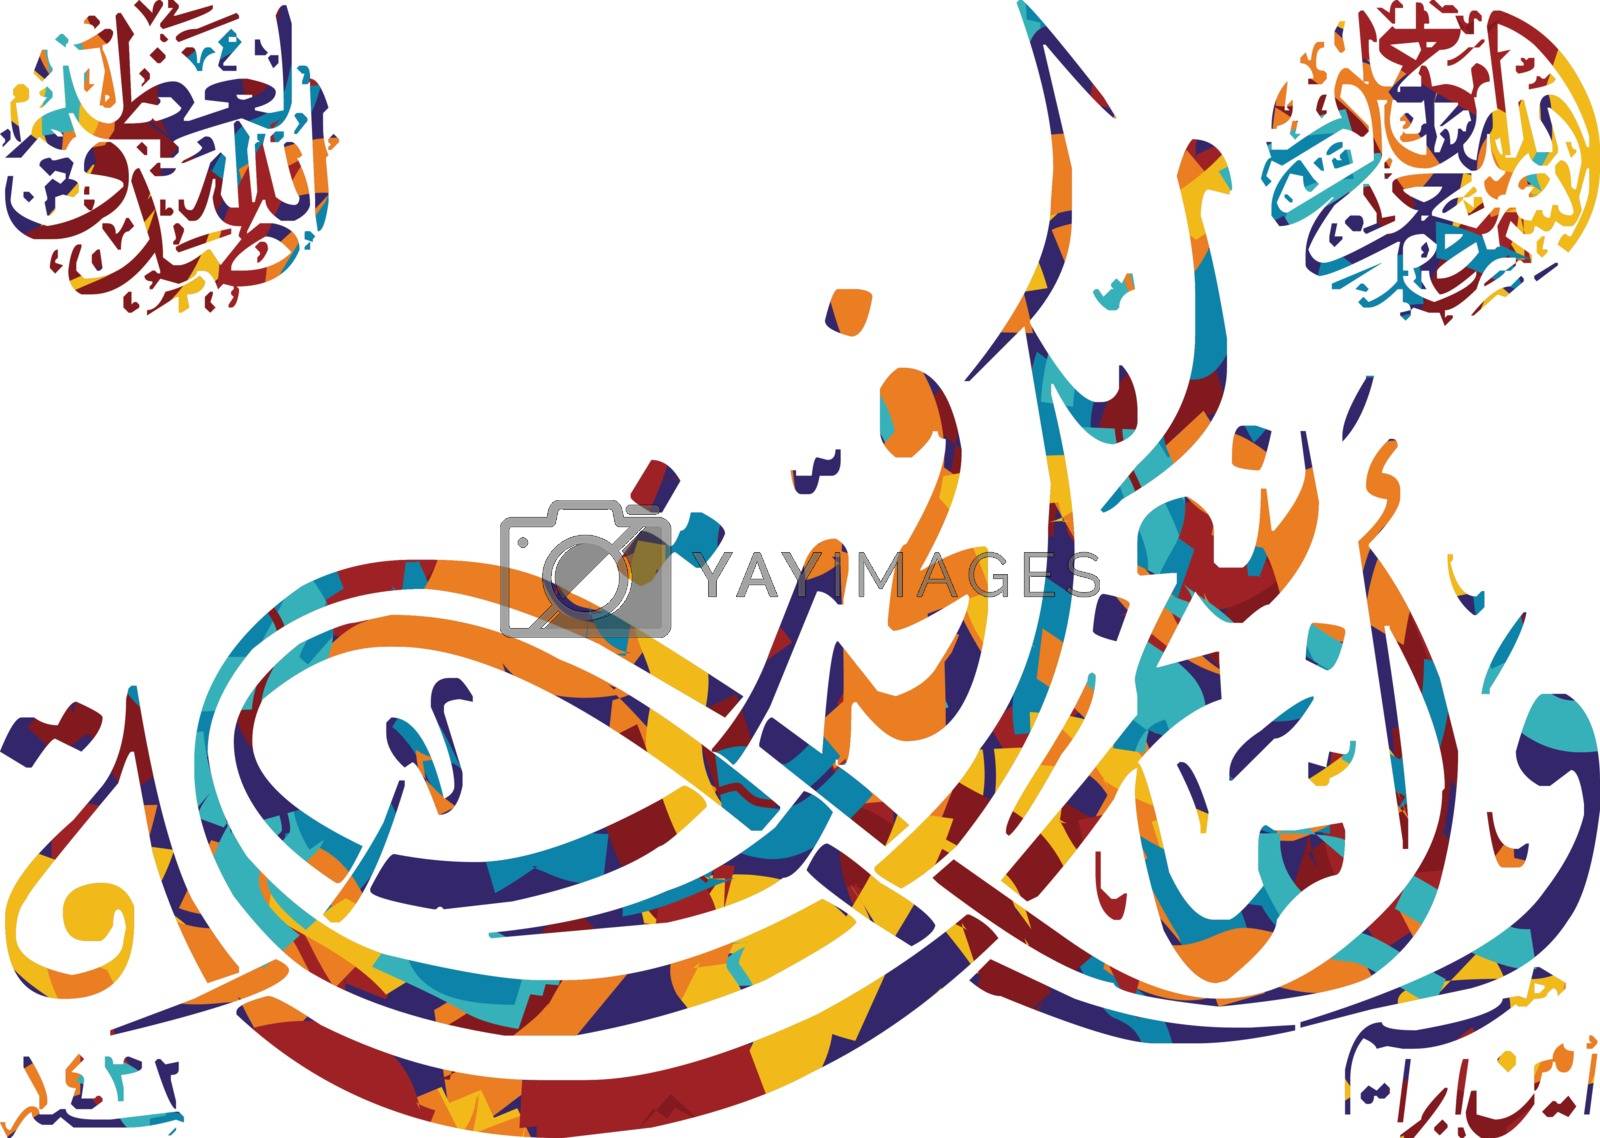 Royalty free image of arabic calligraphy almighty god allah most gracious by vector1st